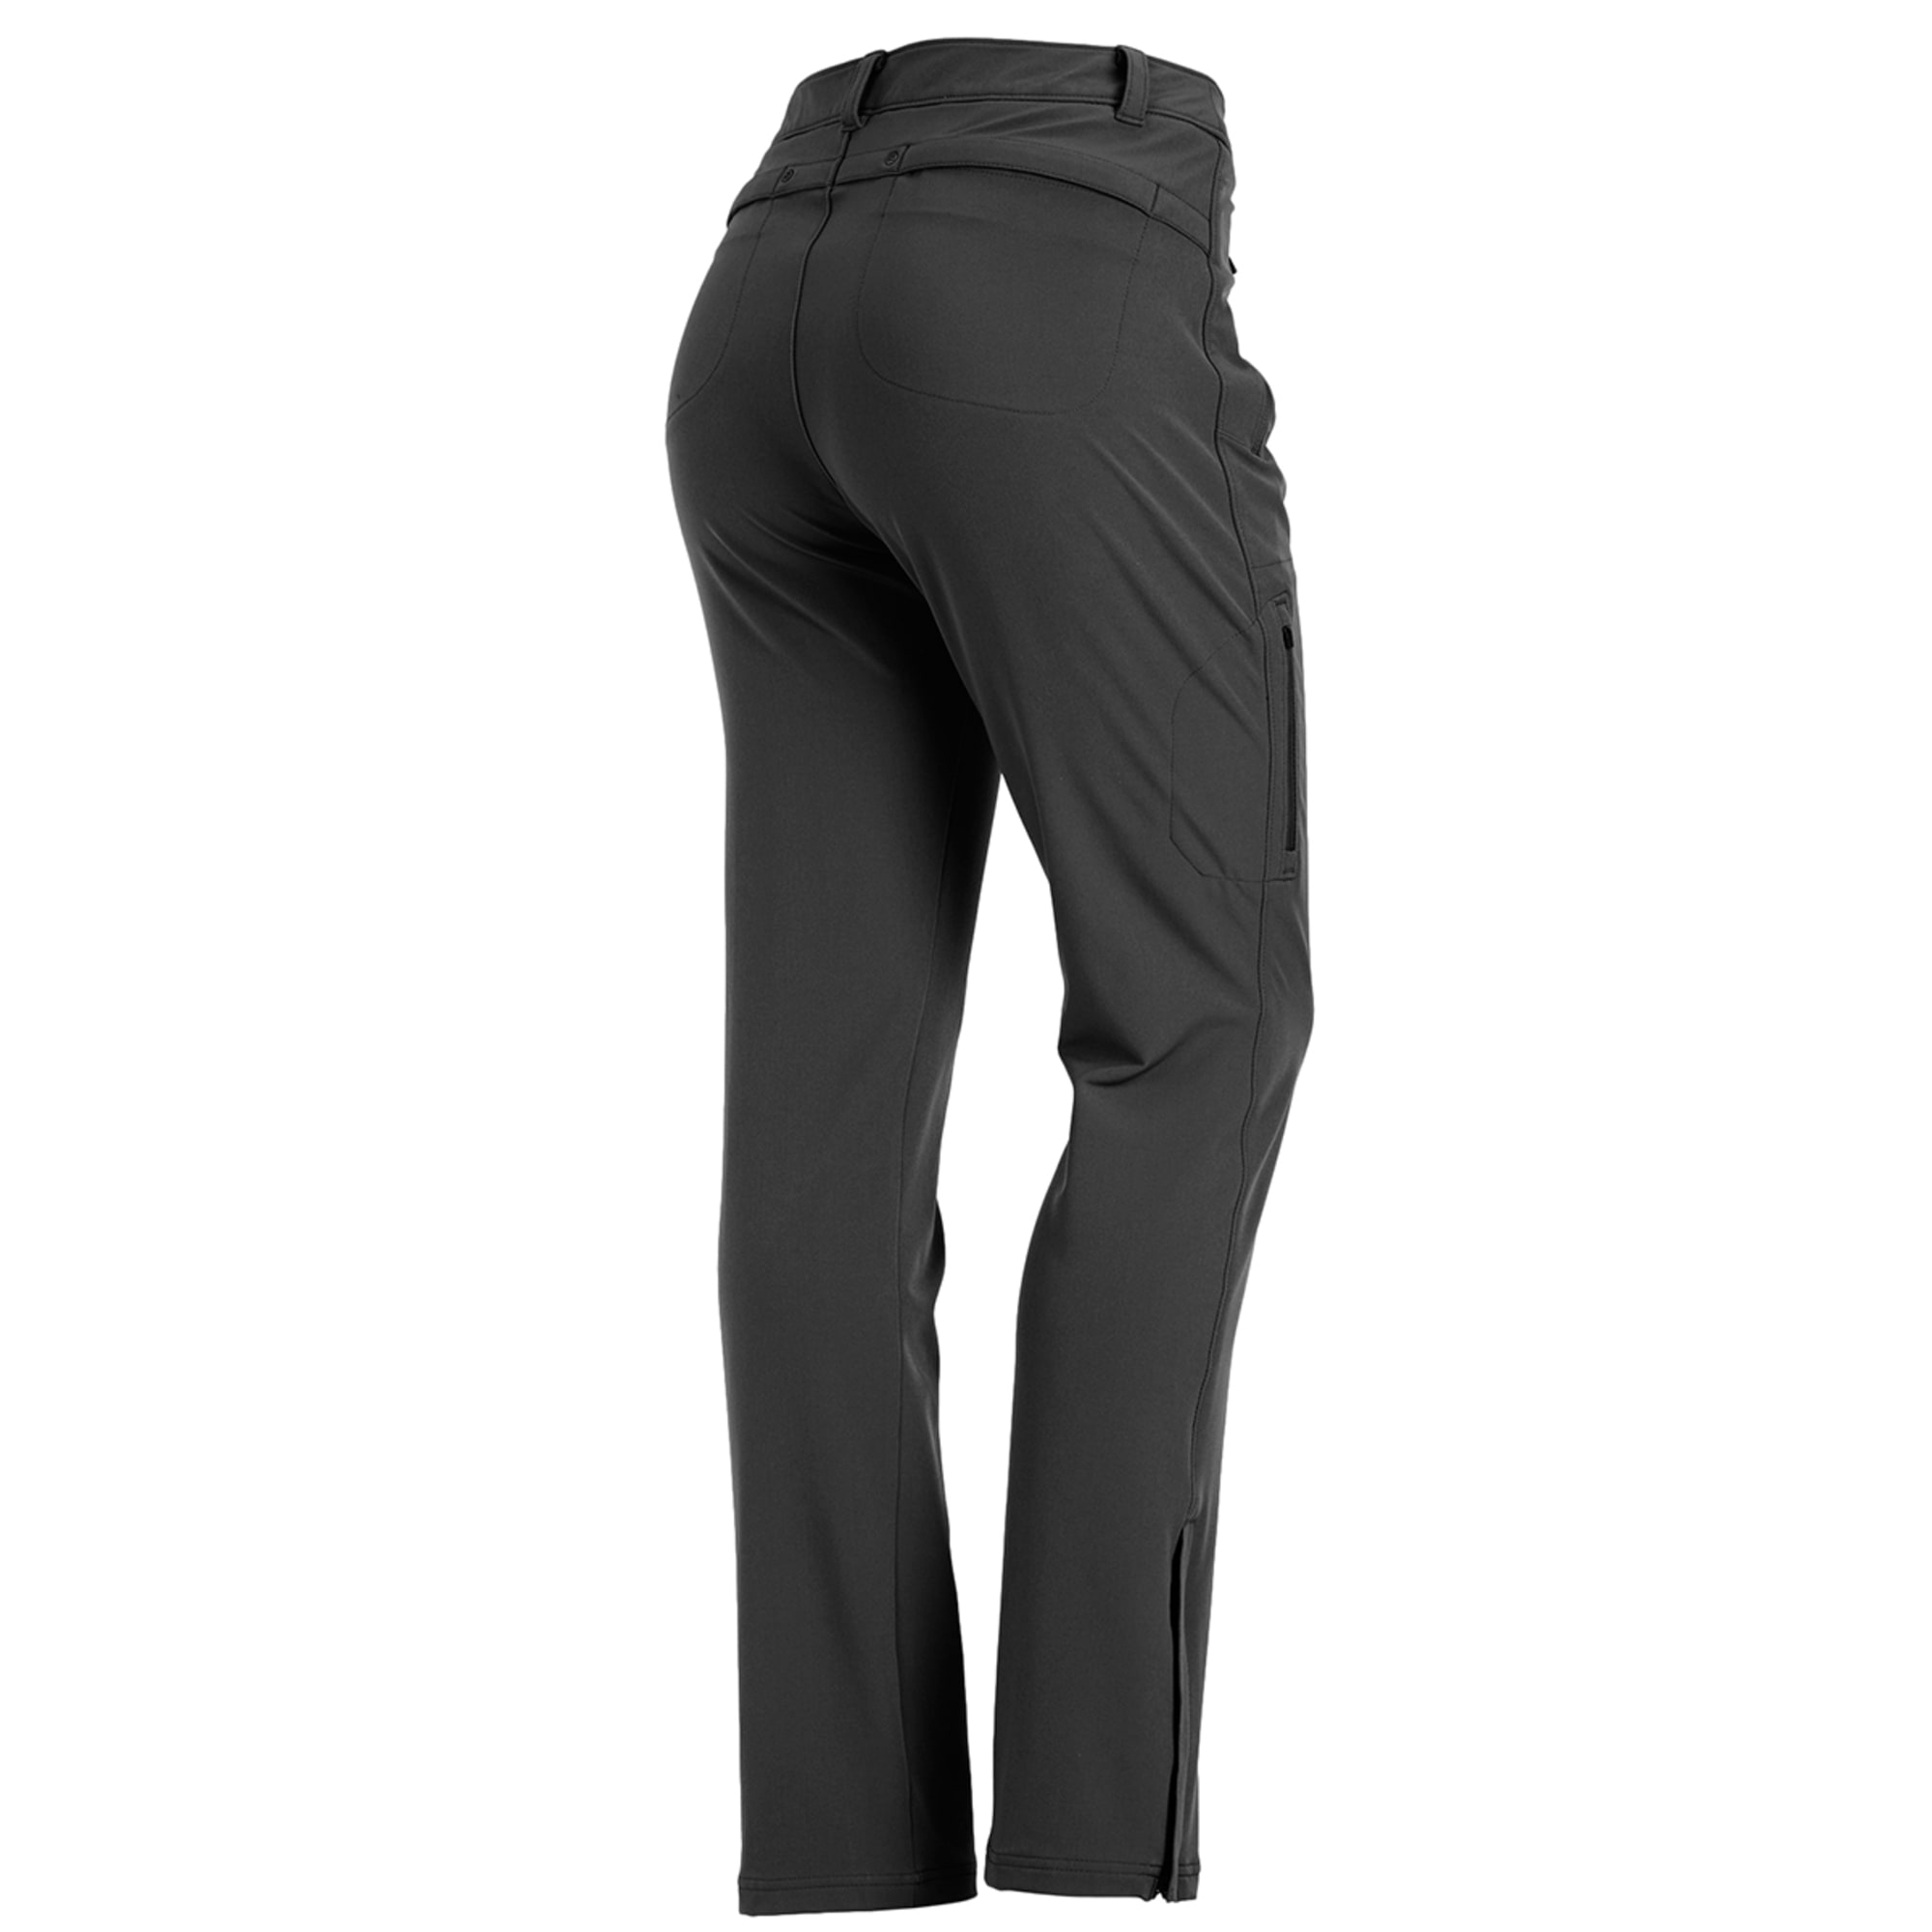 Eastern Mountain Sports 100% Viscose Snow Pants for Women